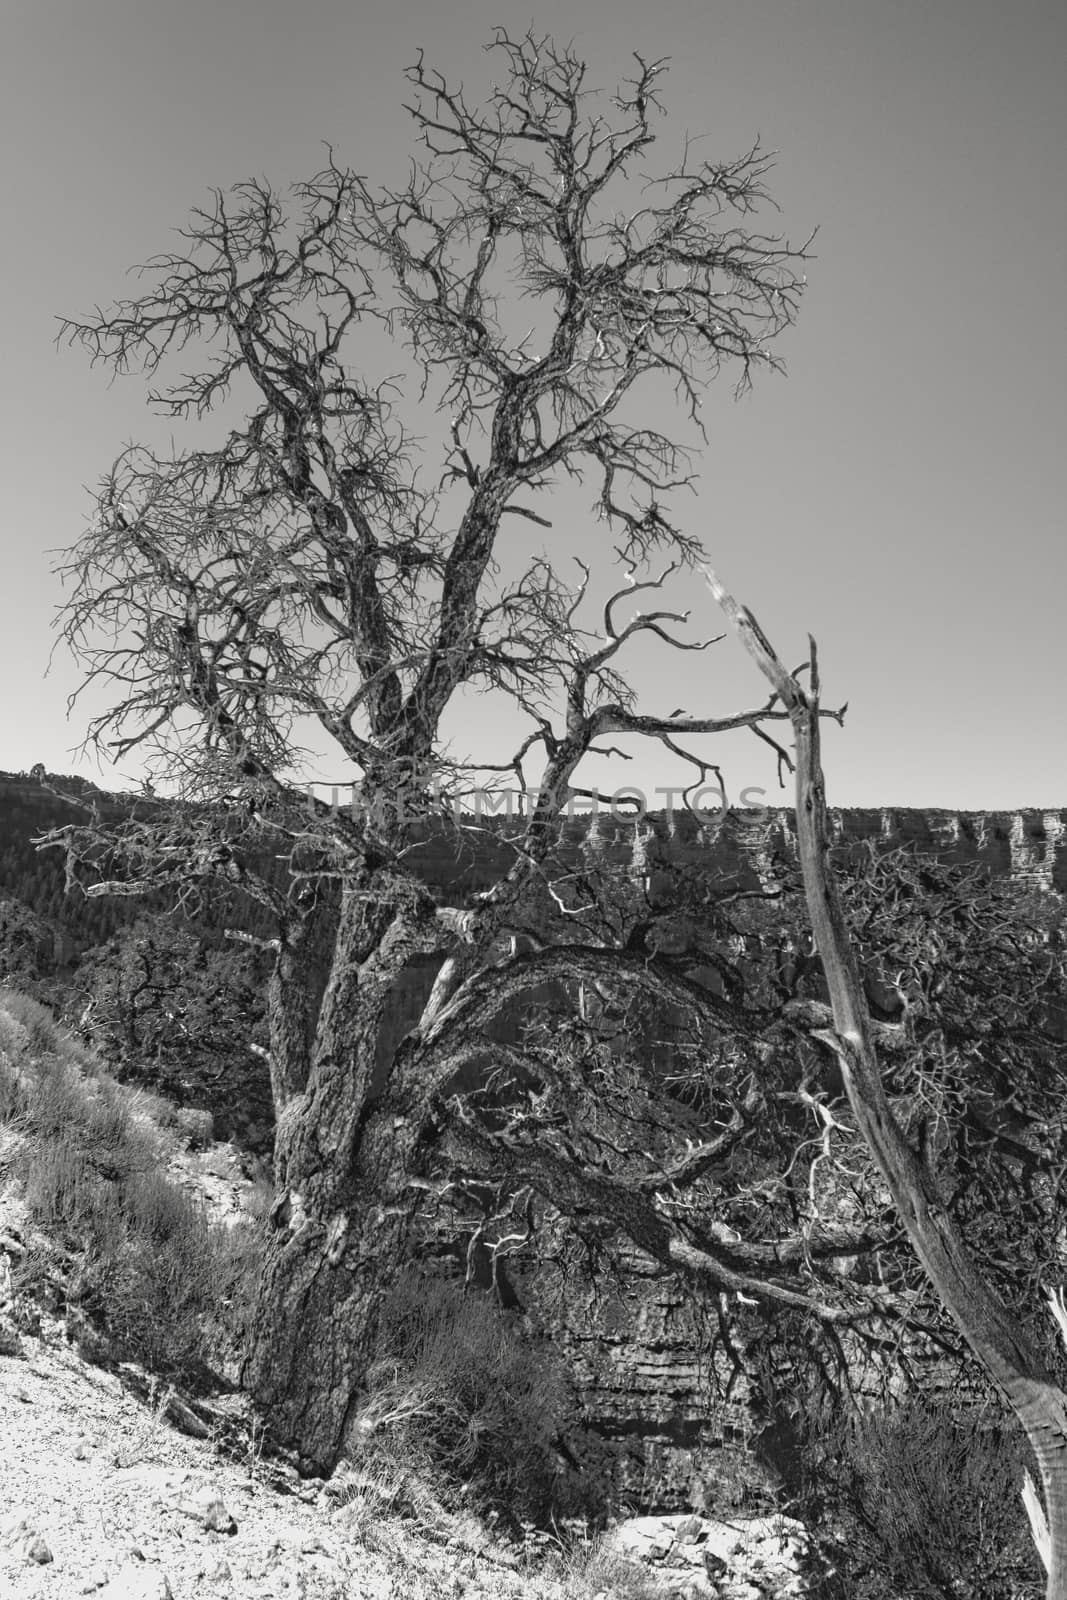 Dry tree in Grand Canyon on a summer day black and white